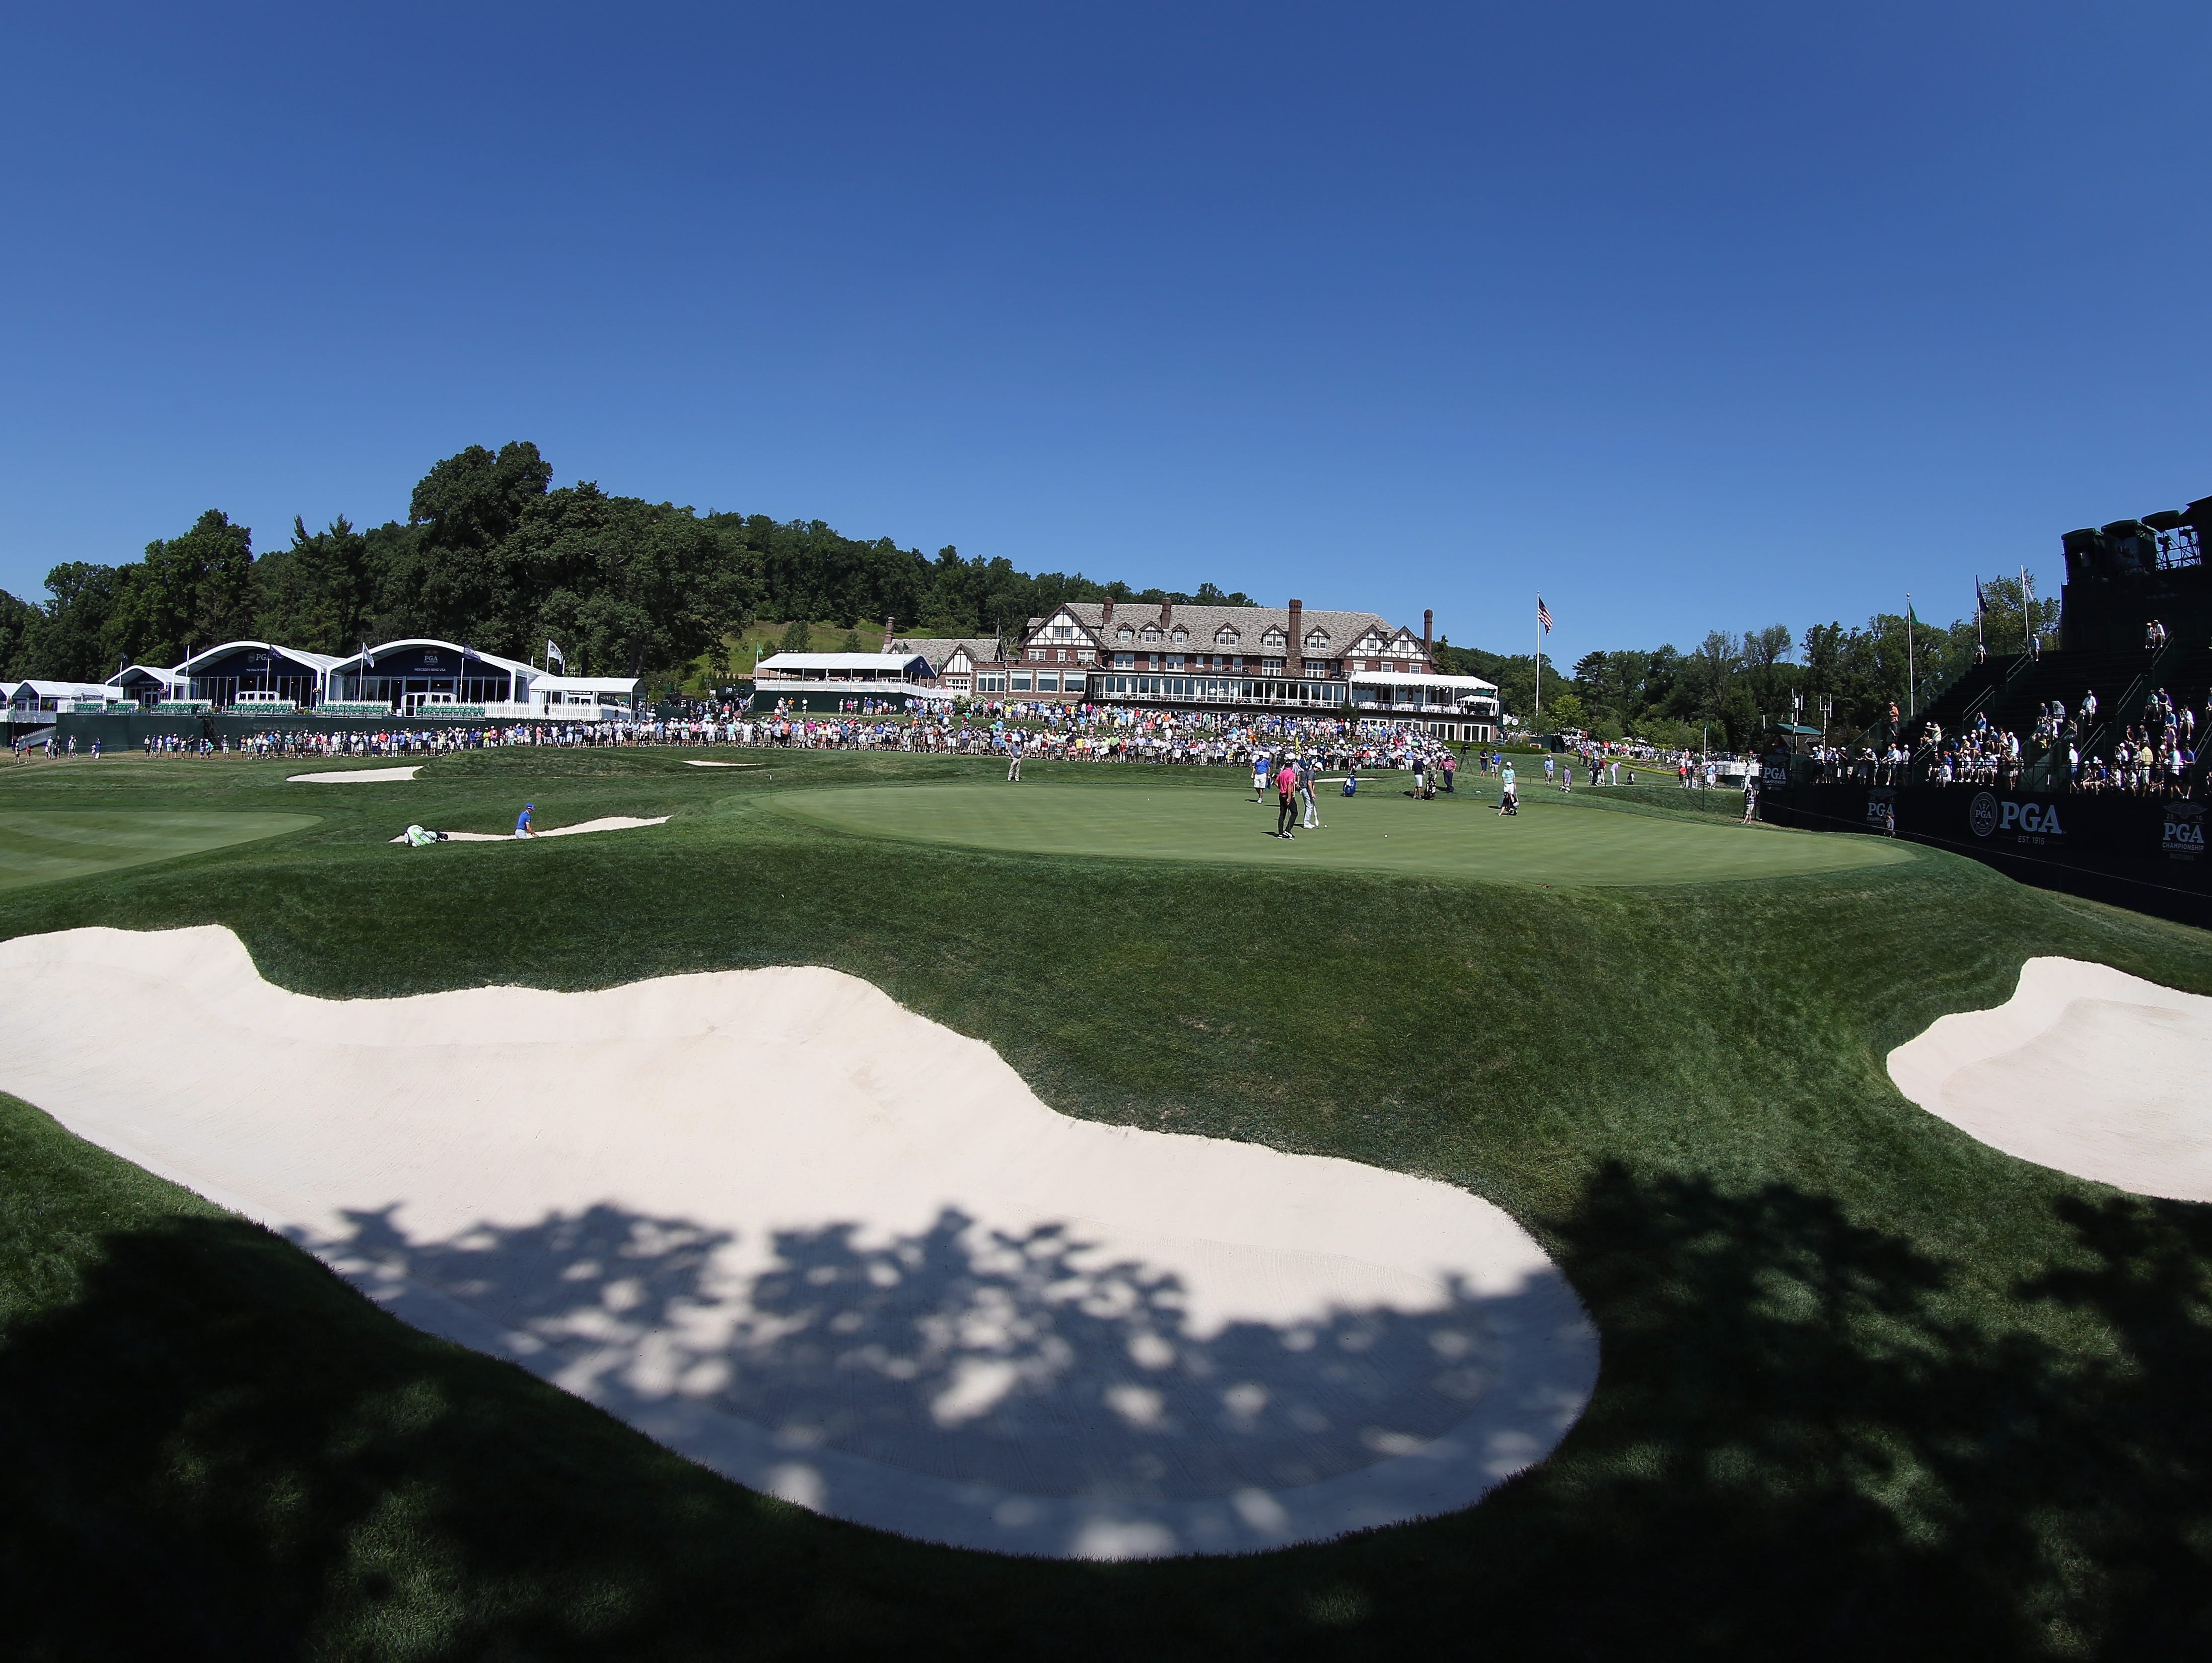 The 18th green is seen during a practice round prior to the 2016 PGA Championship at Baltusrol Golf Club on July 27, 2016 in Springfield, New Jersey.